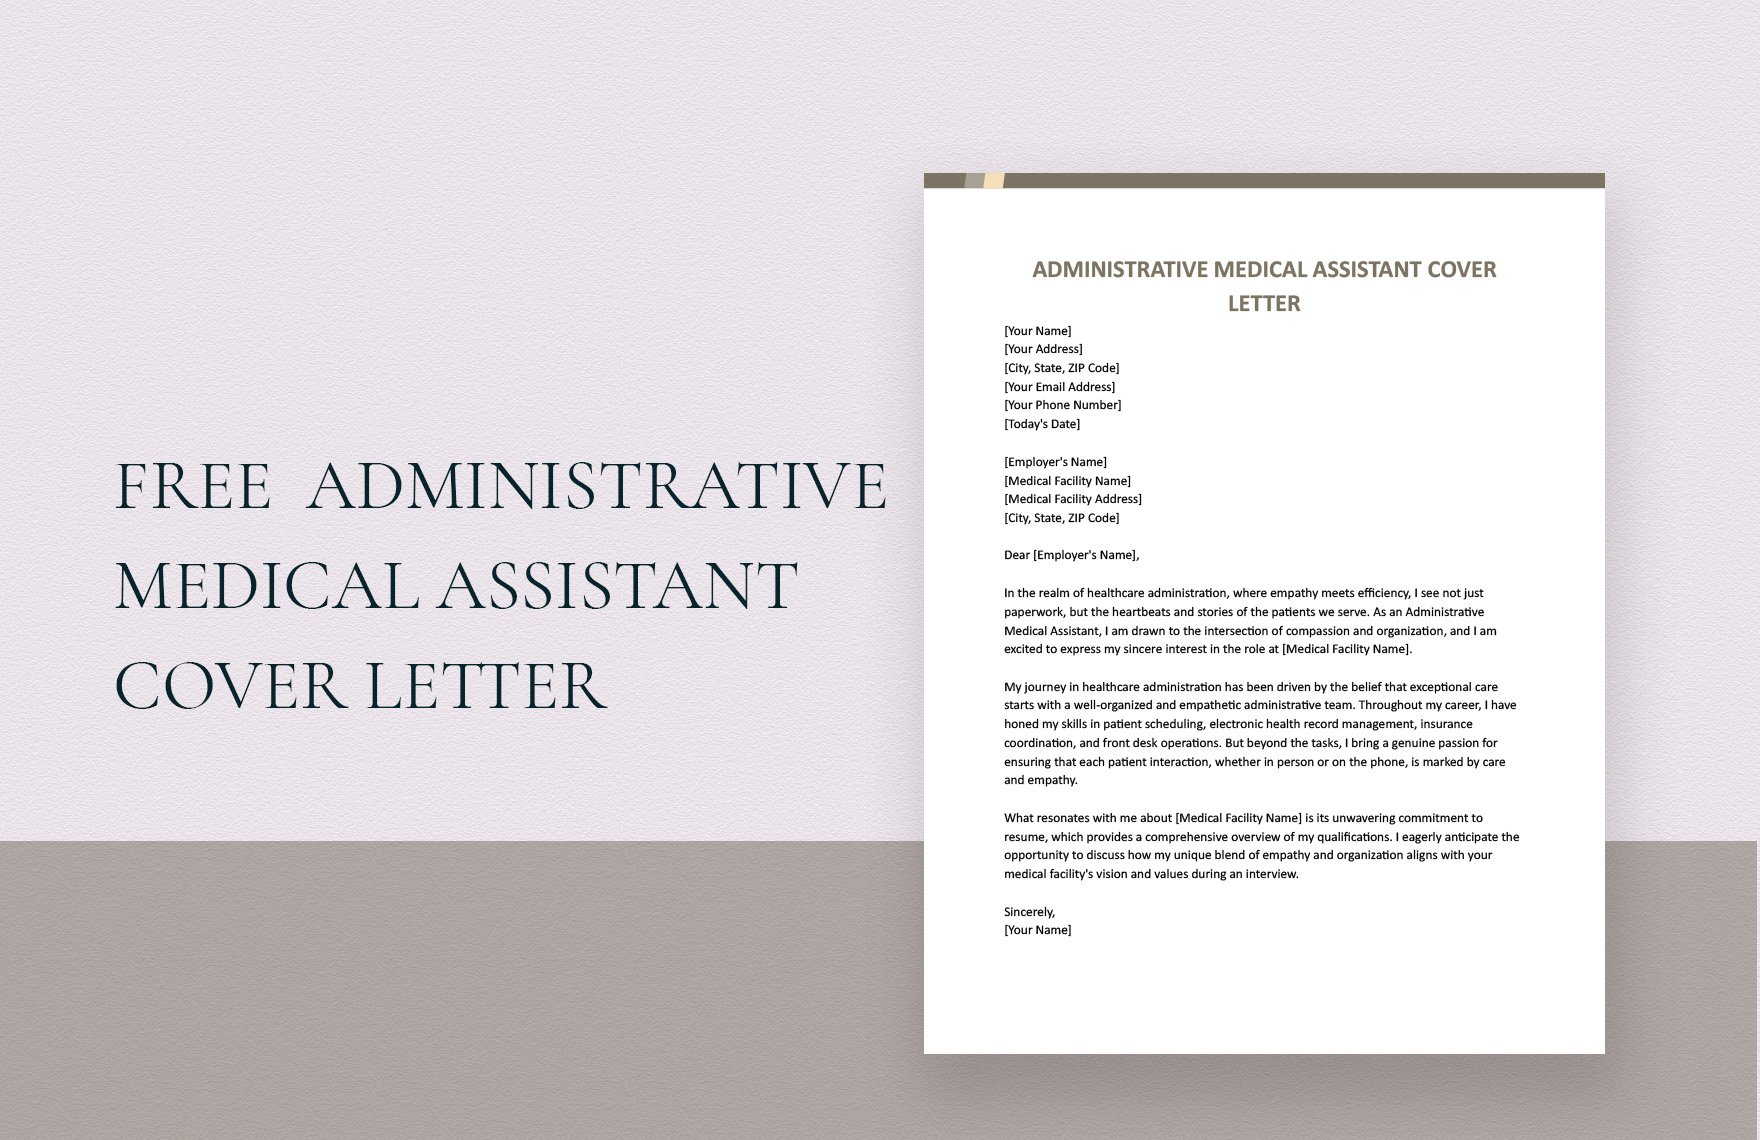 Administrative Medical Assistant Cover Letter 